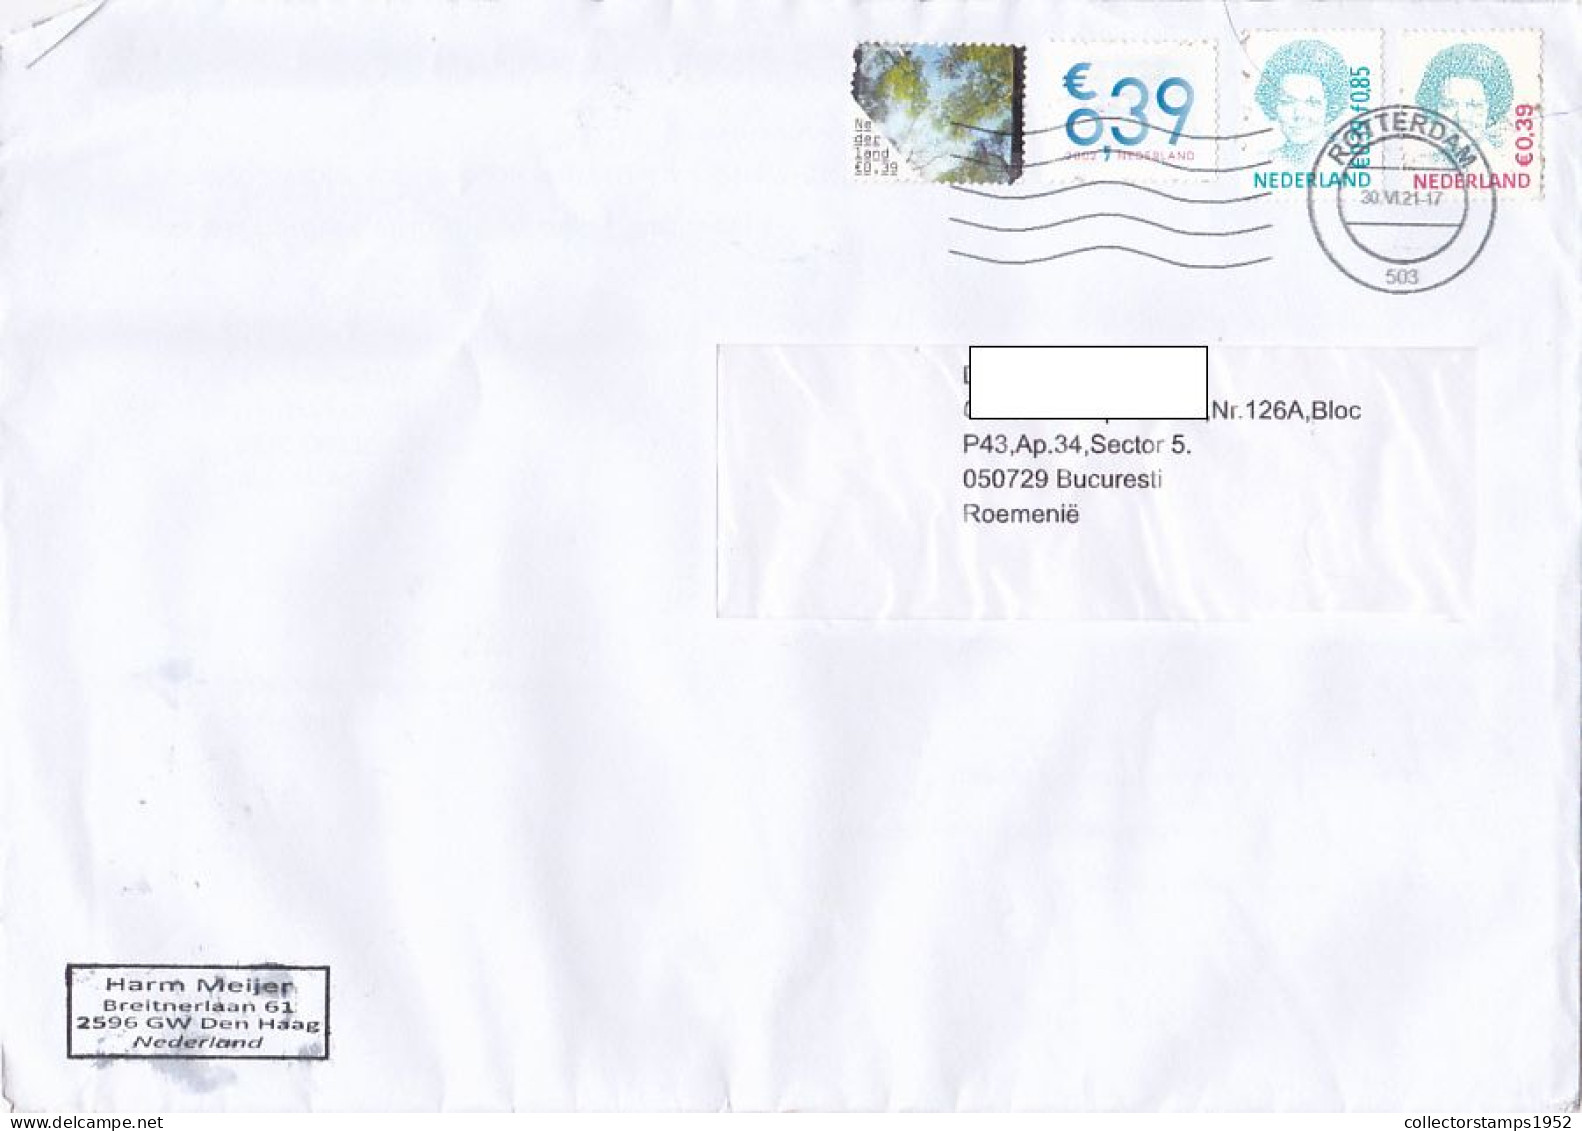 NATURE, QUEEN BEATRIX, FINE STAMPS ON COVER, 2021, NETHERLANDS - Covers & Documents